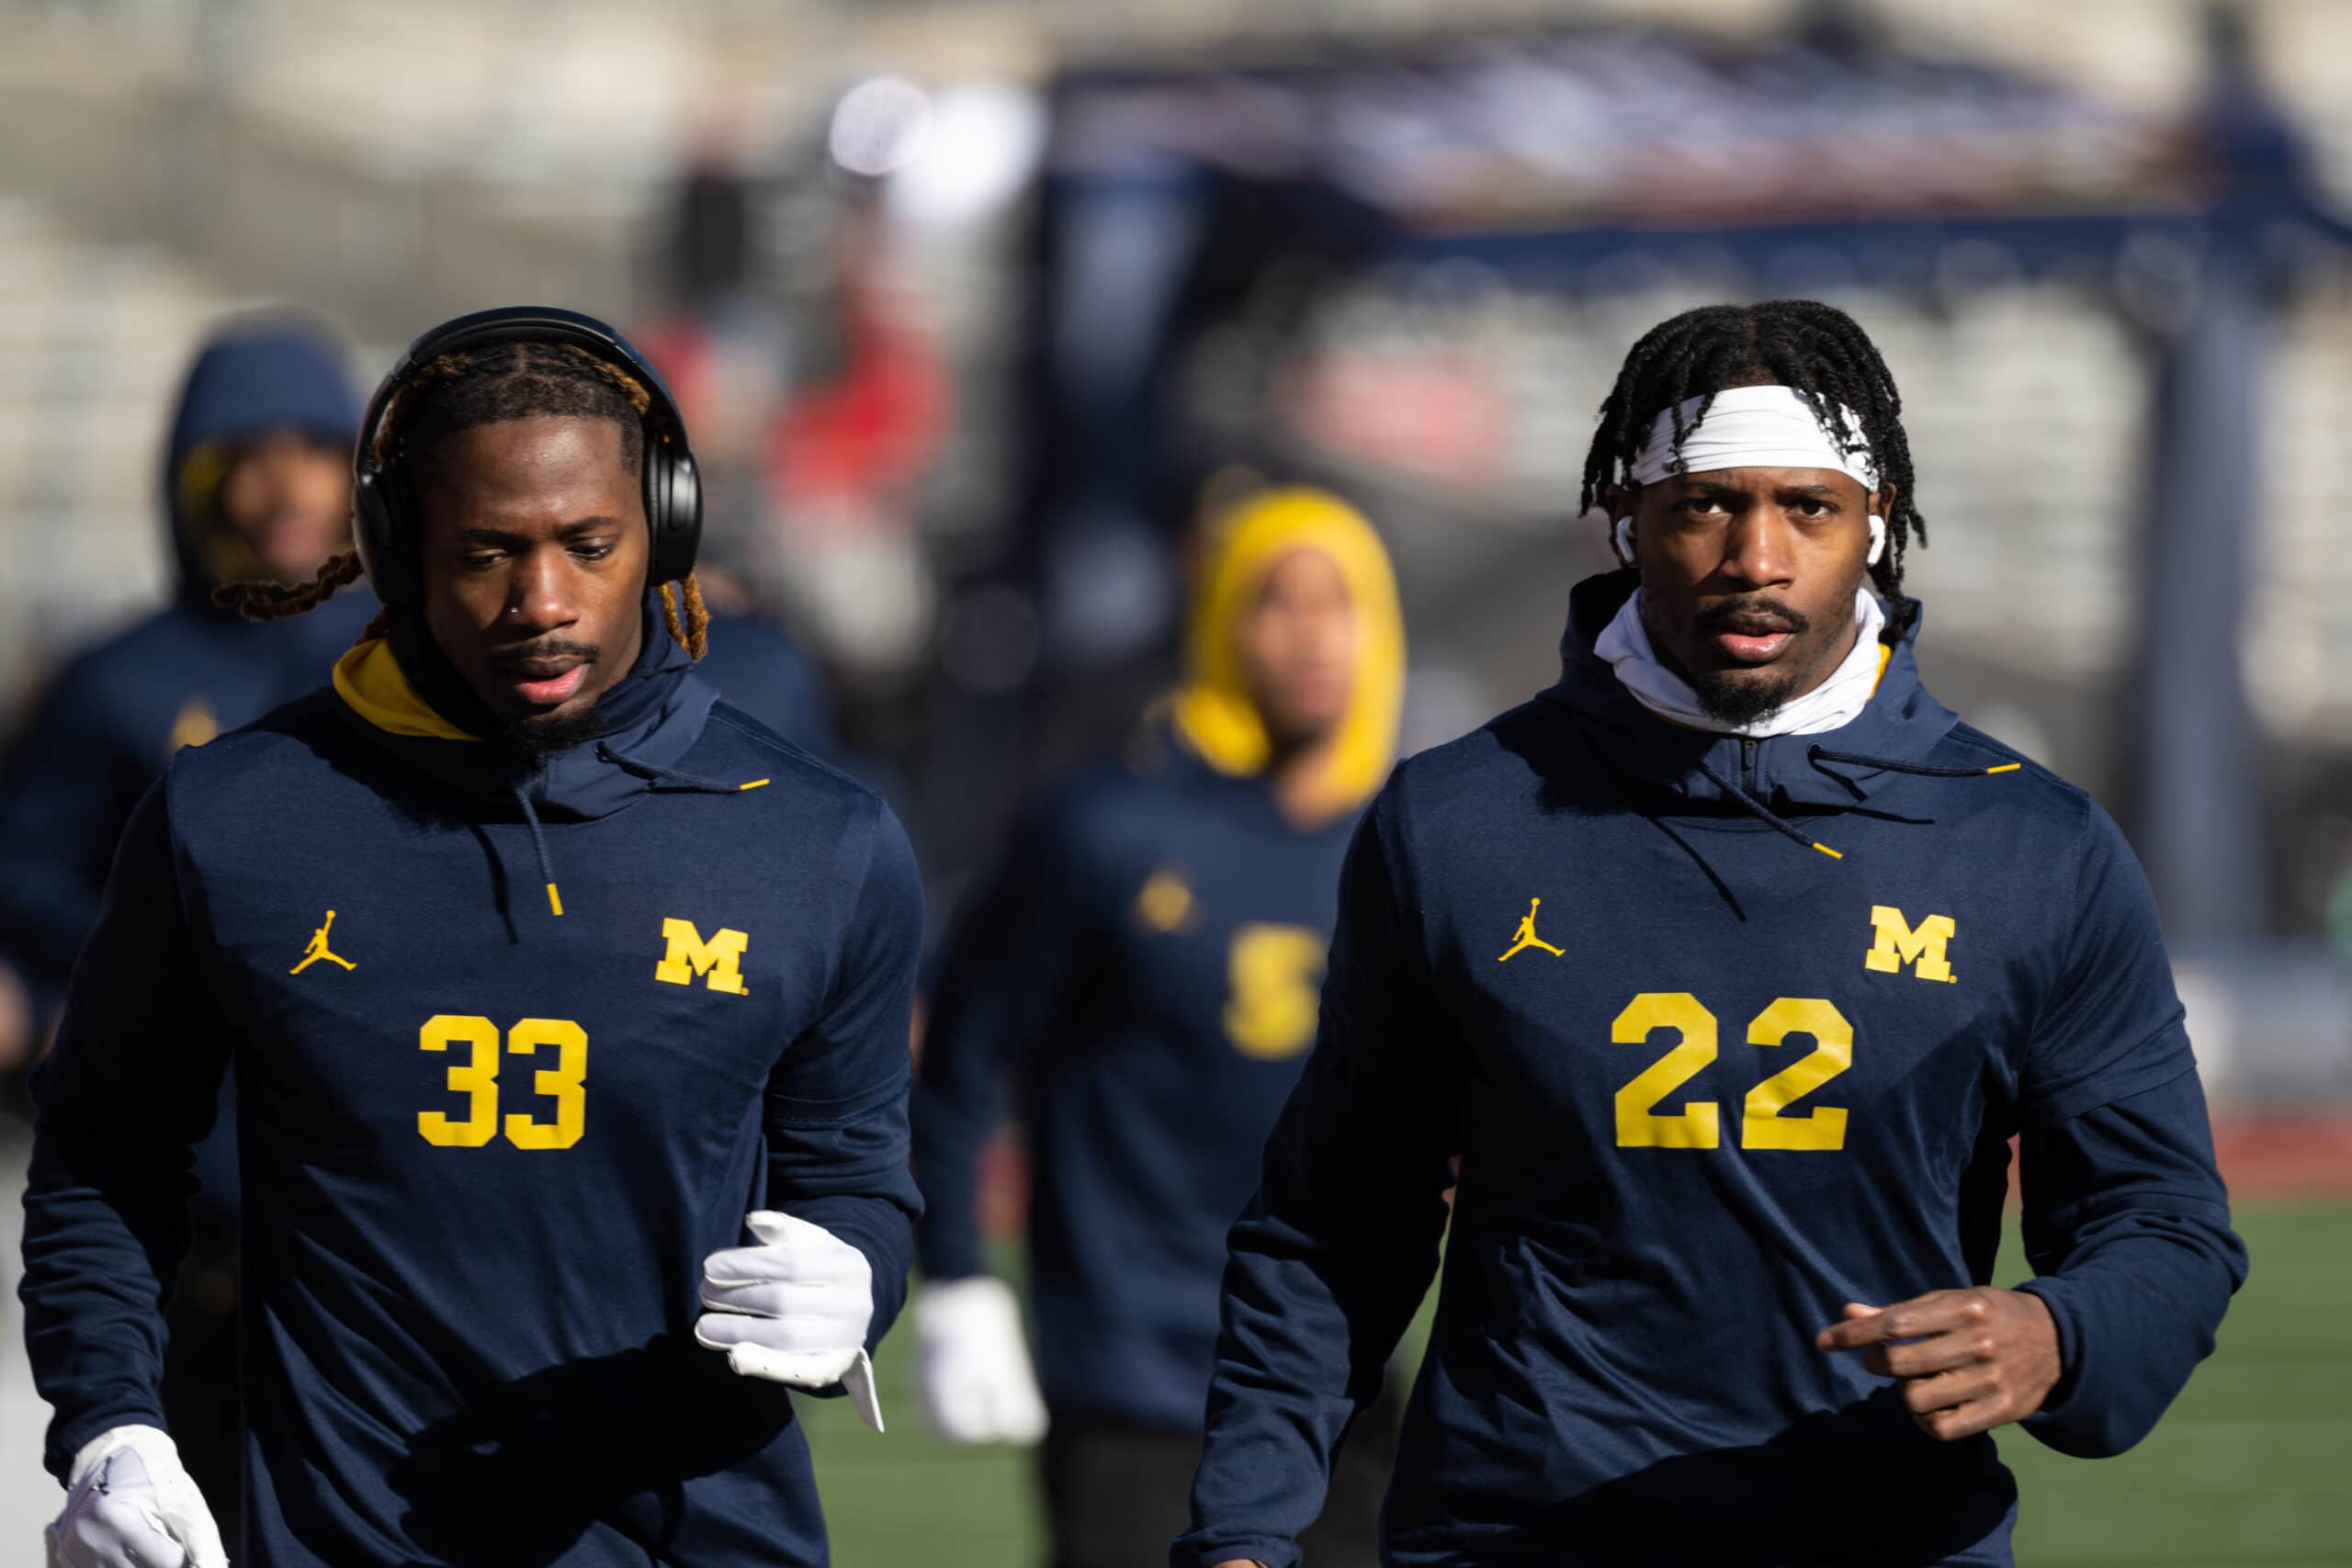 Michigan football players number 33 and number 22